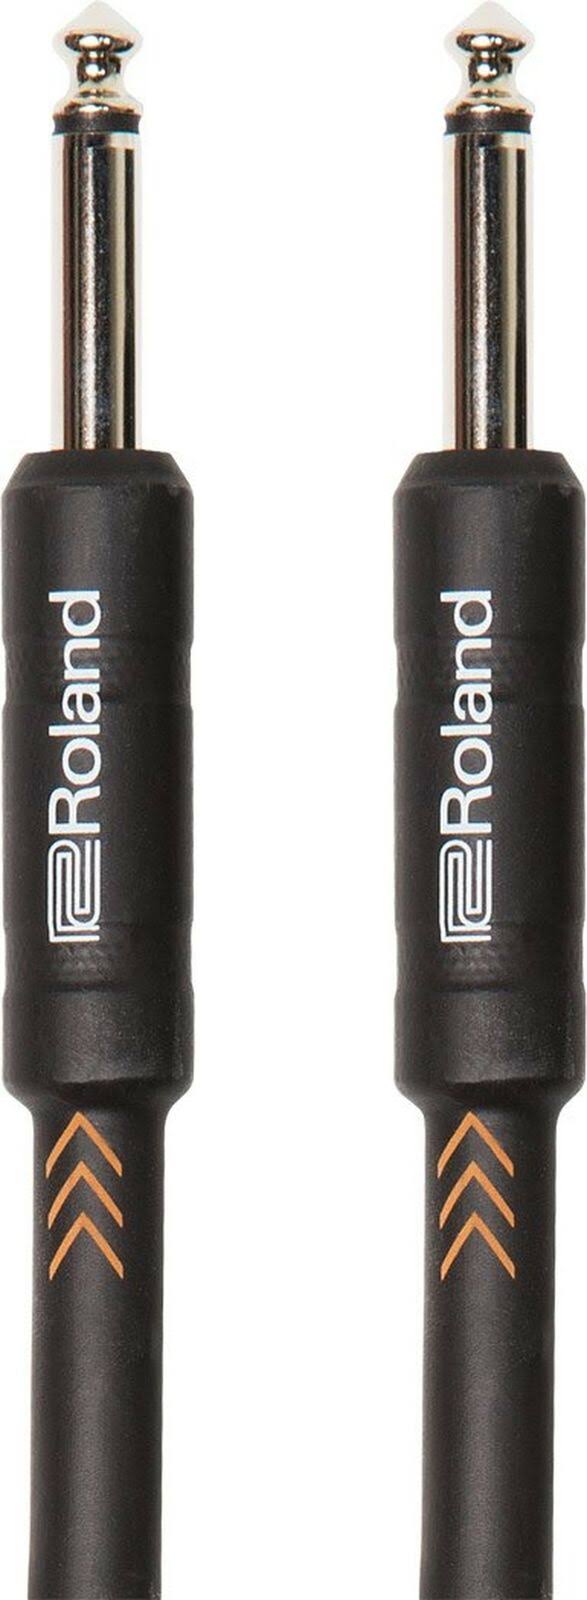 Roland 10ft/3m Instrument Cable - Straight/Straight 1/4” Jack